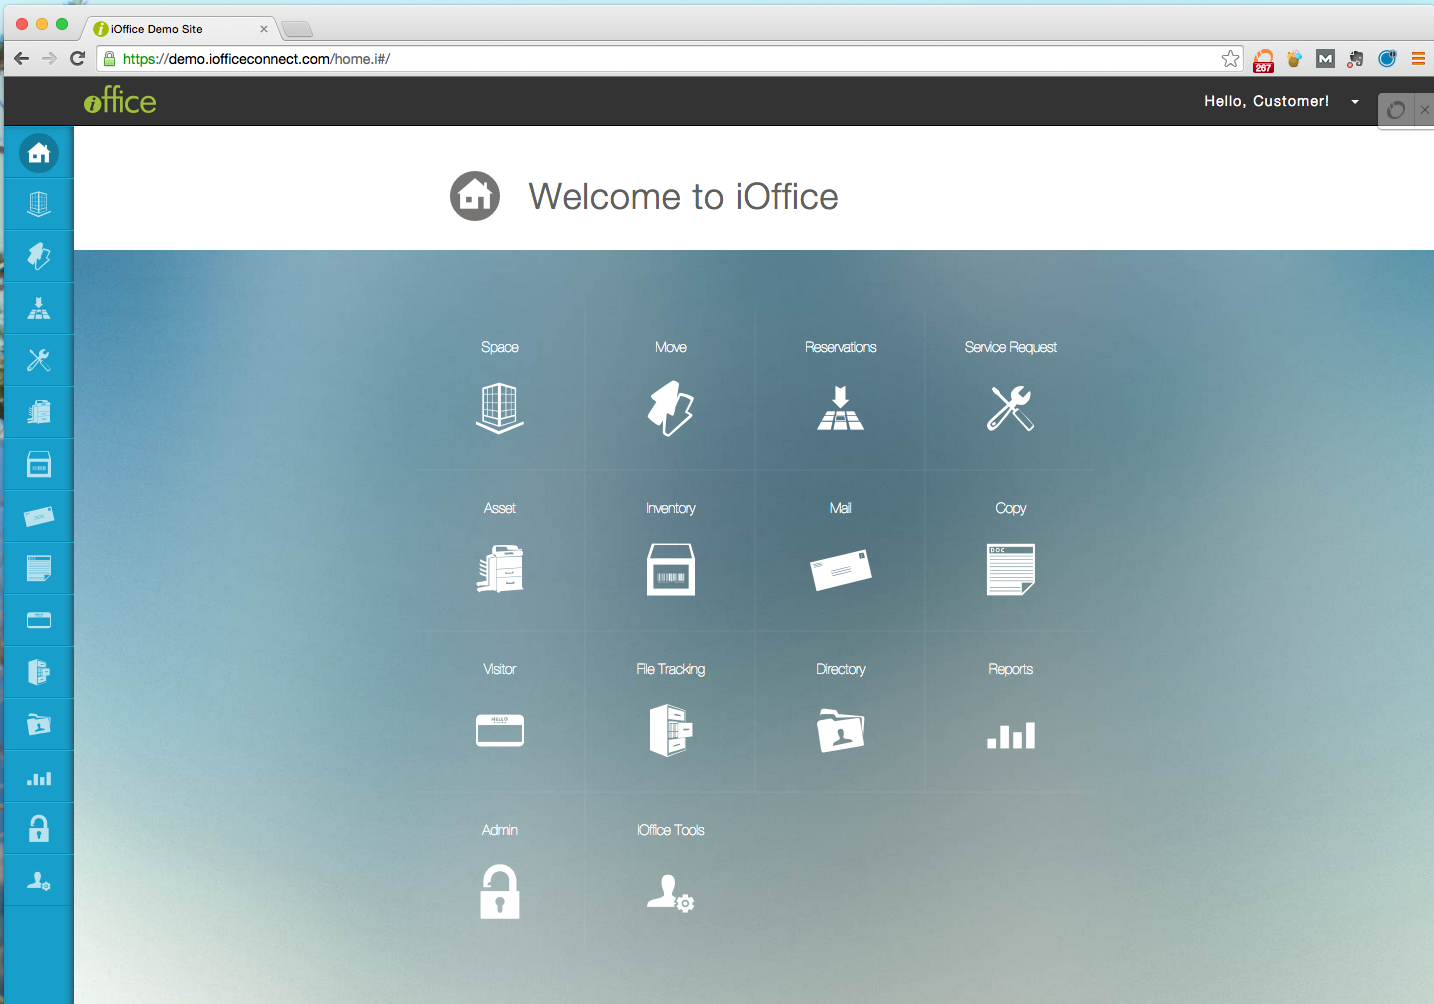 Google Chrome is the browser we recommend with the iOffice FM Software tool.